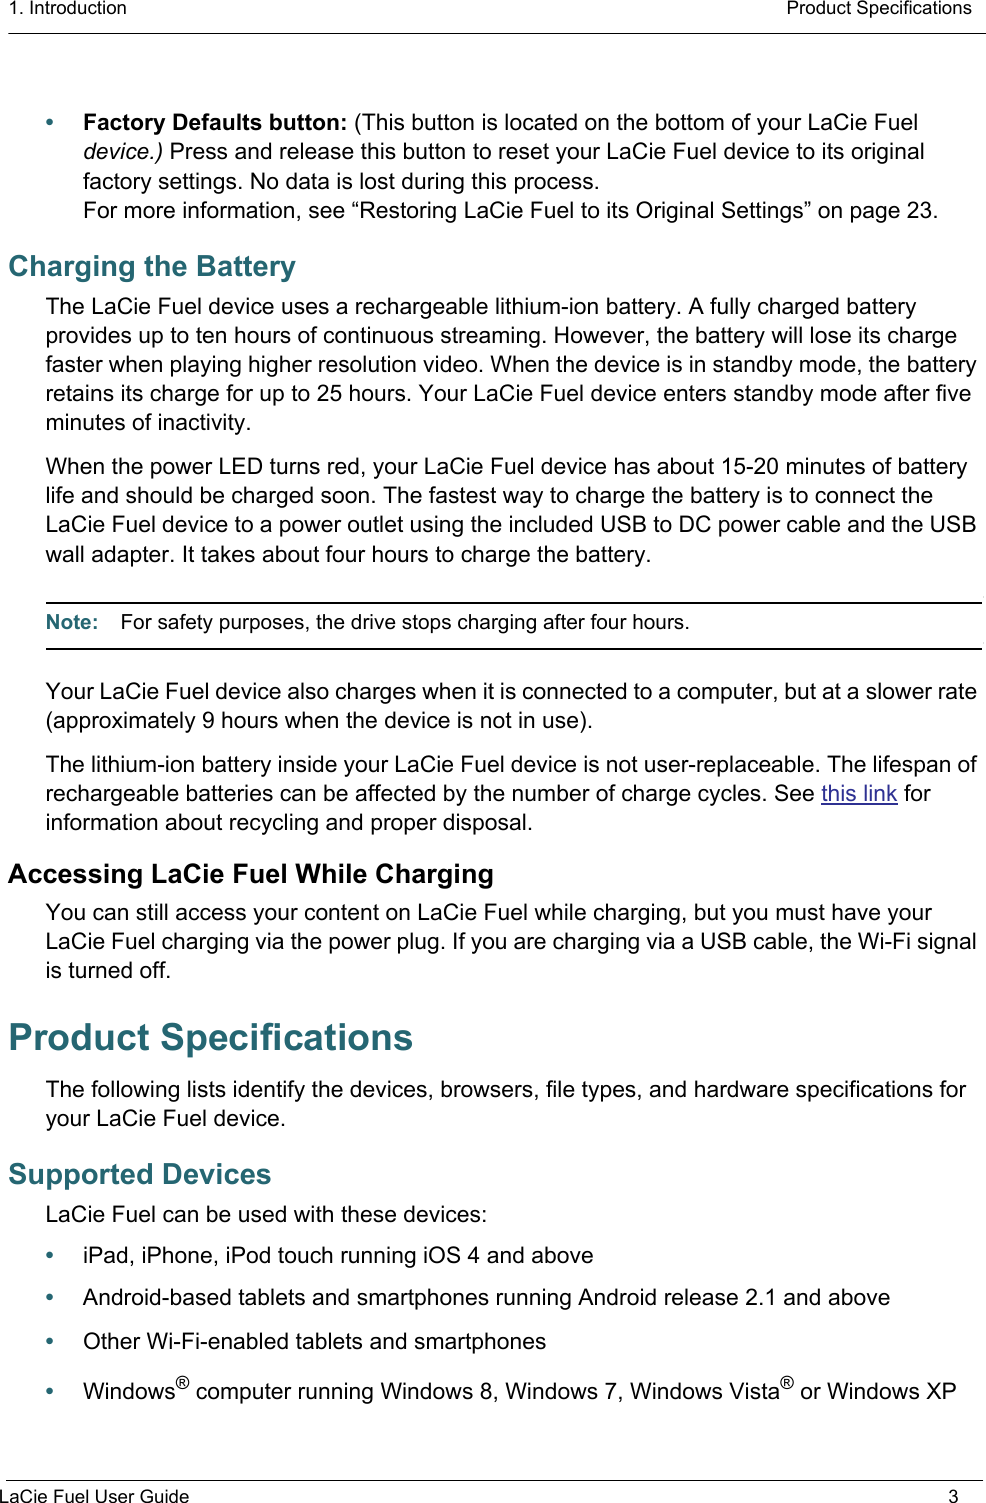 1. Introduction  Product SpecificationsLaCie Fuel User Guide 3•Factory Defaults button: (This button is located on the bottom of your LaCie Fuel device.) Press and release this button to reset your LaCie Fuel device to its original factory settings. No data is lost during this process.For more information, see “Restoring LaCie Fuel to its Original Settings” on page 23.Charging the BatteryThe LaCie Fuel device uses a rechargeable lithium-ion battery. A fully charged battery provides up to ten hours of continuous streaming. However, the battery will lose its charge faster when playing higher resolution video. When the device is in standby mode, the battery retains its charge for up to 25 hours. Your LaCie Fuel device enters standby mode after five minutes of inactivity.When the power LED turns red, your LaCie Fuel device has about 15-20 minutes of battery life and should be charged soon. The fastest way to charge the battery is to connect the LaCie Fuel device to a power outlet using the included USB to DC power cable and the USB wall adapter. It takes about four hours to charge the battery.Note:  For safety purposes, the drive stops charging after four hours.Your LaCie Fuel device also charges when it is connected to a computer, but at a slower rate (approximately 9 hours when the device is not in use).The lithium-ion battery inside your LaCie Fuel device is not user-replaceable. The lifespan of rechargeable batteries can be affected by the number of charge cycles. See this link for information about recycling and proper disposal.Accessing LaCie Fuel While ChargingYou can still access your content on LaCie Fuel while charging, but you must have your LaCie Fuel charging via the power plug. If you are charging via a USB cable, the Wi-Fi signal is turned off.Product SpecificationsThe following lists identify the devices, browsers, file types, and hardware specifications for your LaCie Fuel device.Supported DevicesLaCie Fuel can be used with these devices:•iPad, iPhone, iPod touch running iOS 4 and above•Android-based tablets and smartphones running Android release 2.1 and above•Other Wi-Fi-enabled tablets and smartphones•Windows® computer running Windows 8, Windows 7, Windows Vista® or Windows XP